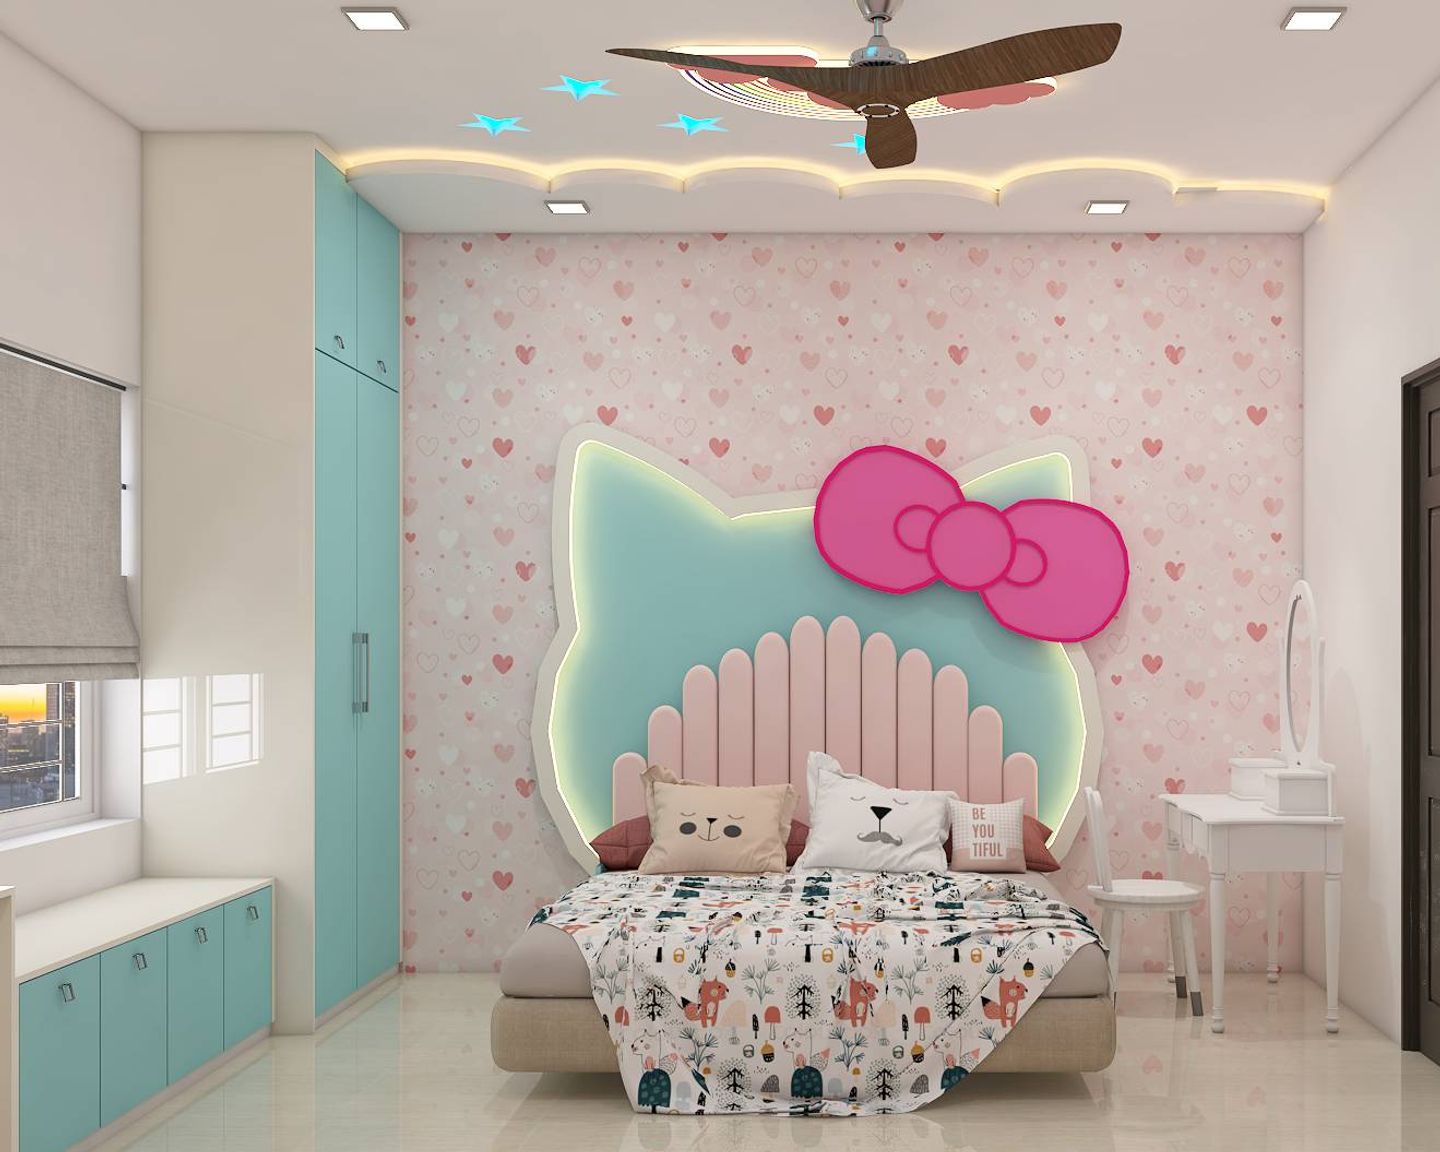 Spacious Kid's Room Design For Girls With Kitty Theme | Livspace